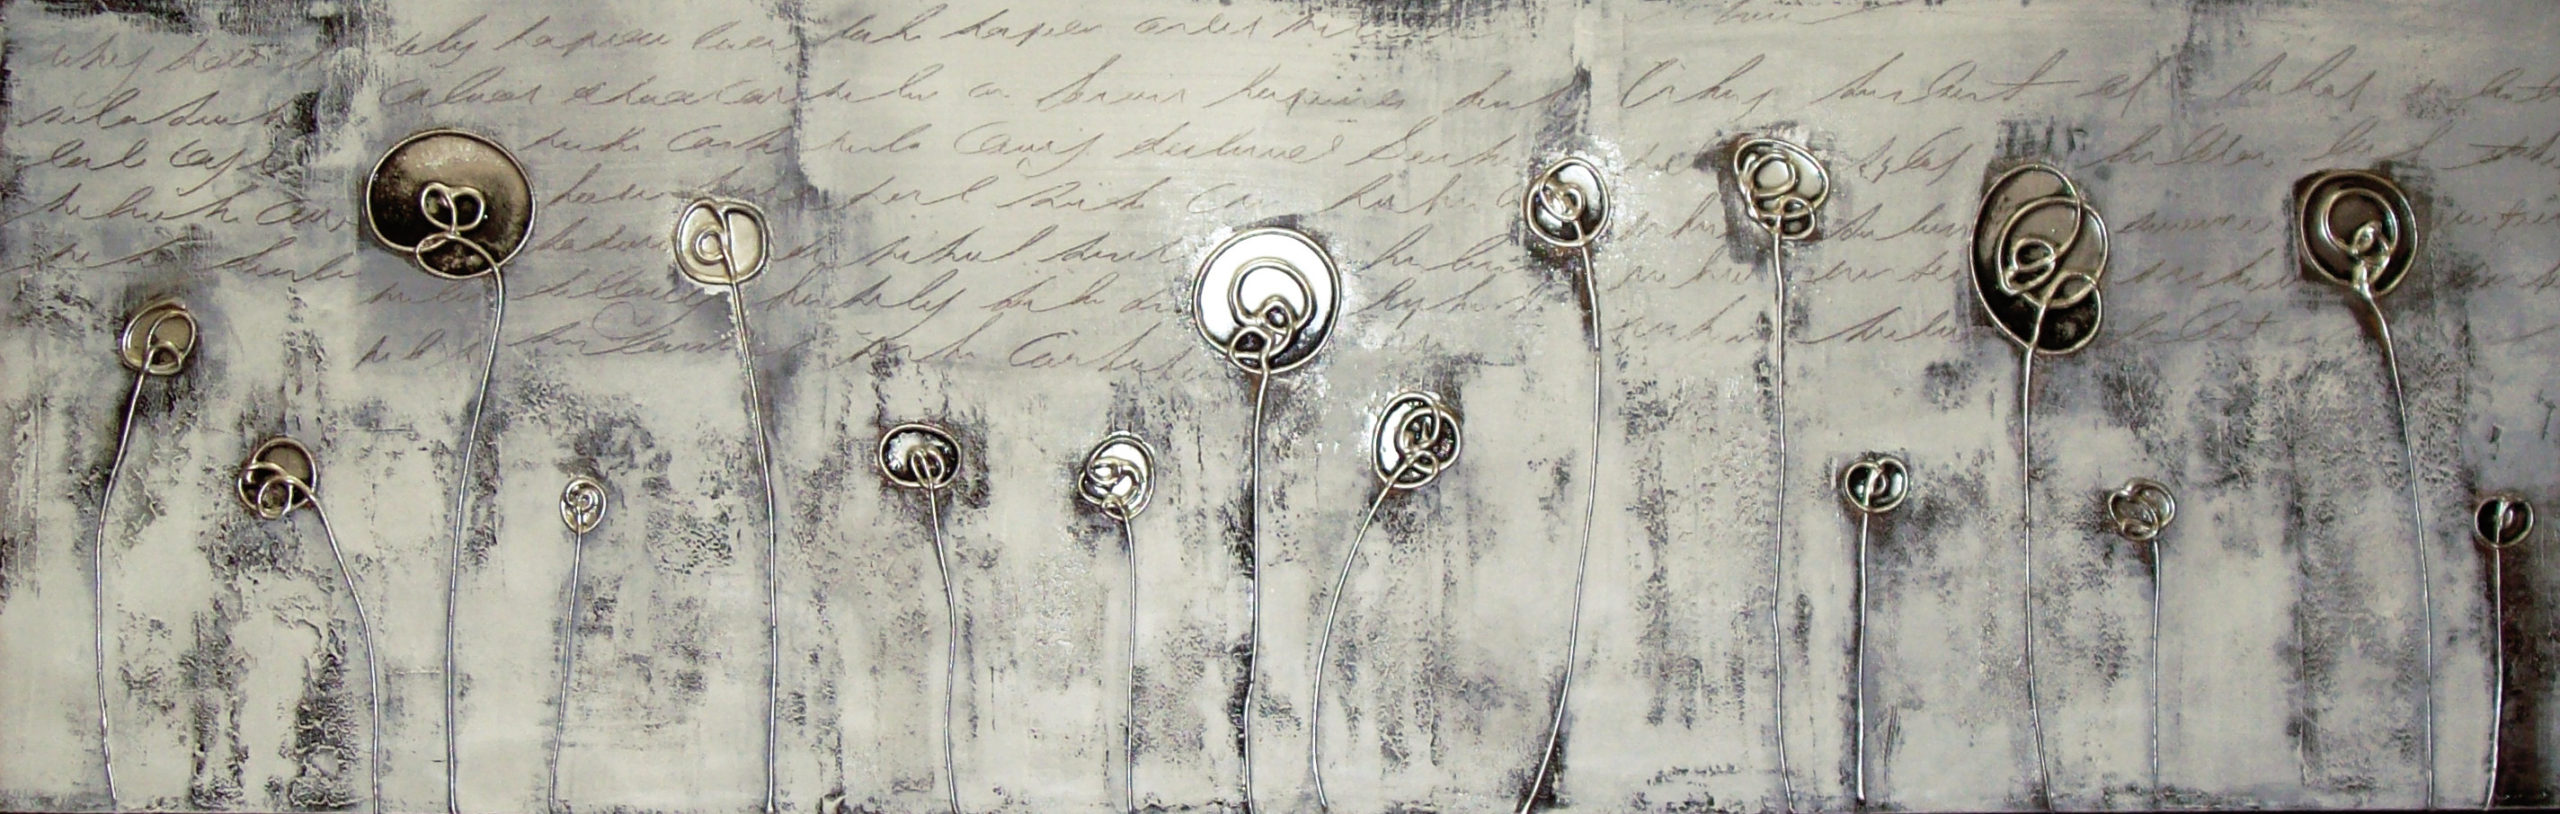 Vicky Sanders Abstract Botanical - Black and White Poppies